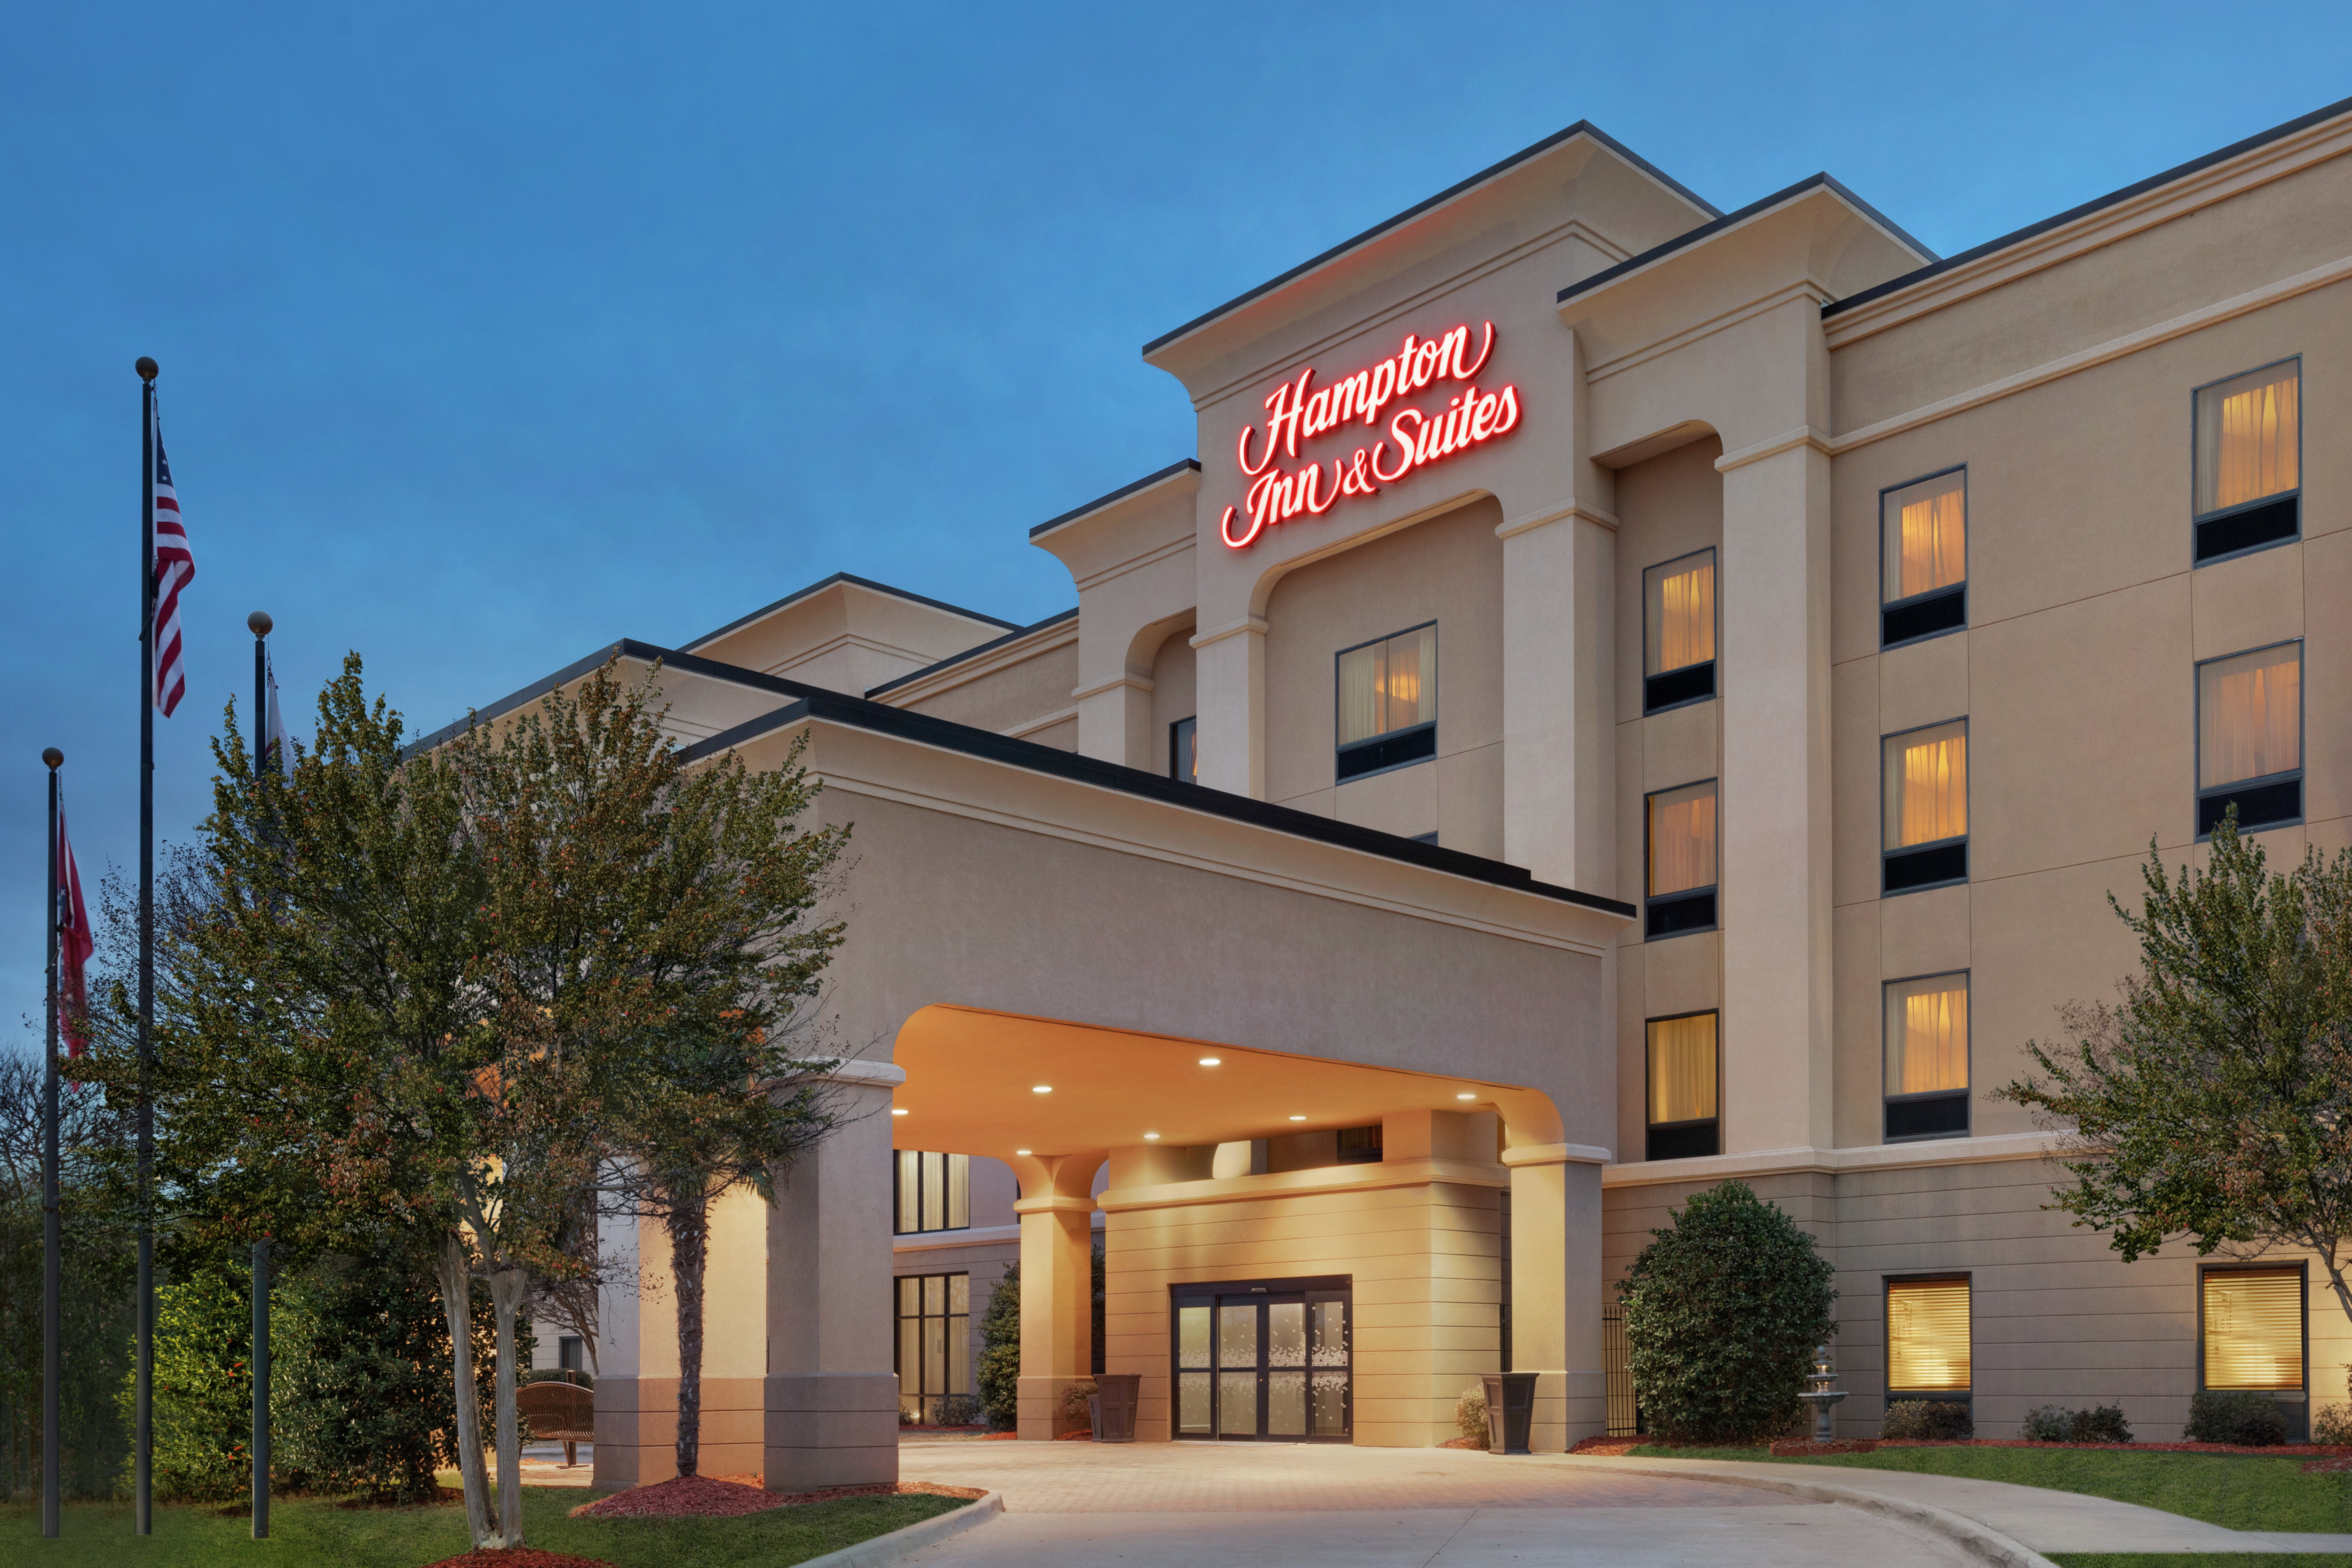 Welcoming Hampton Inn hotel exterior featuring covered entrance, lush landscaping, and glowing guestroom windows.